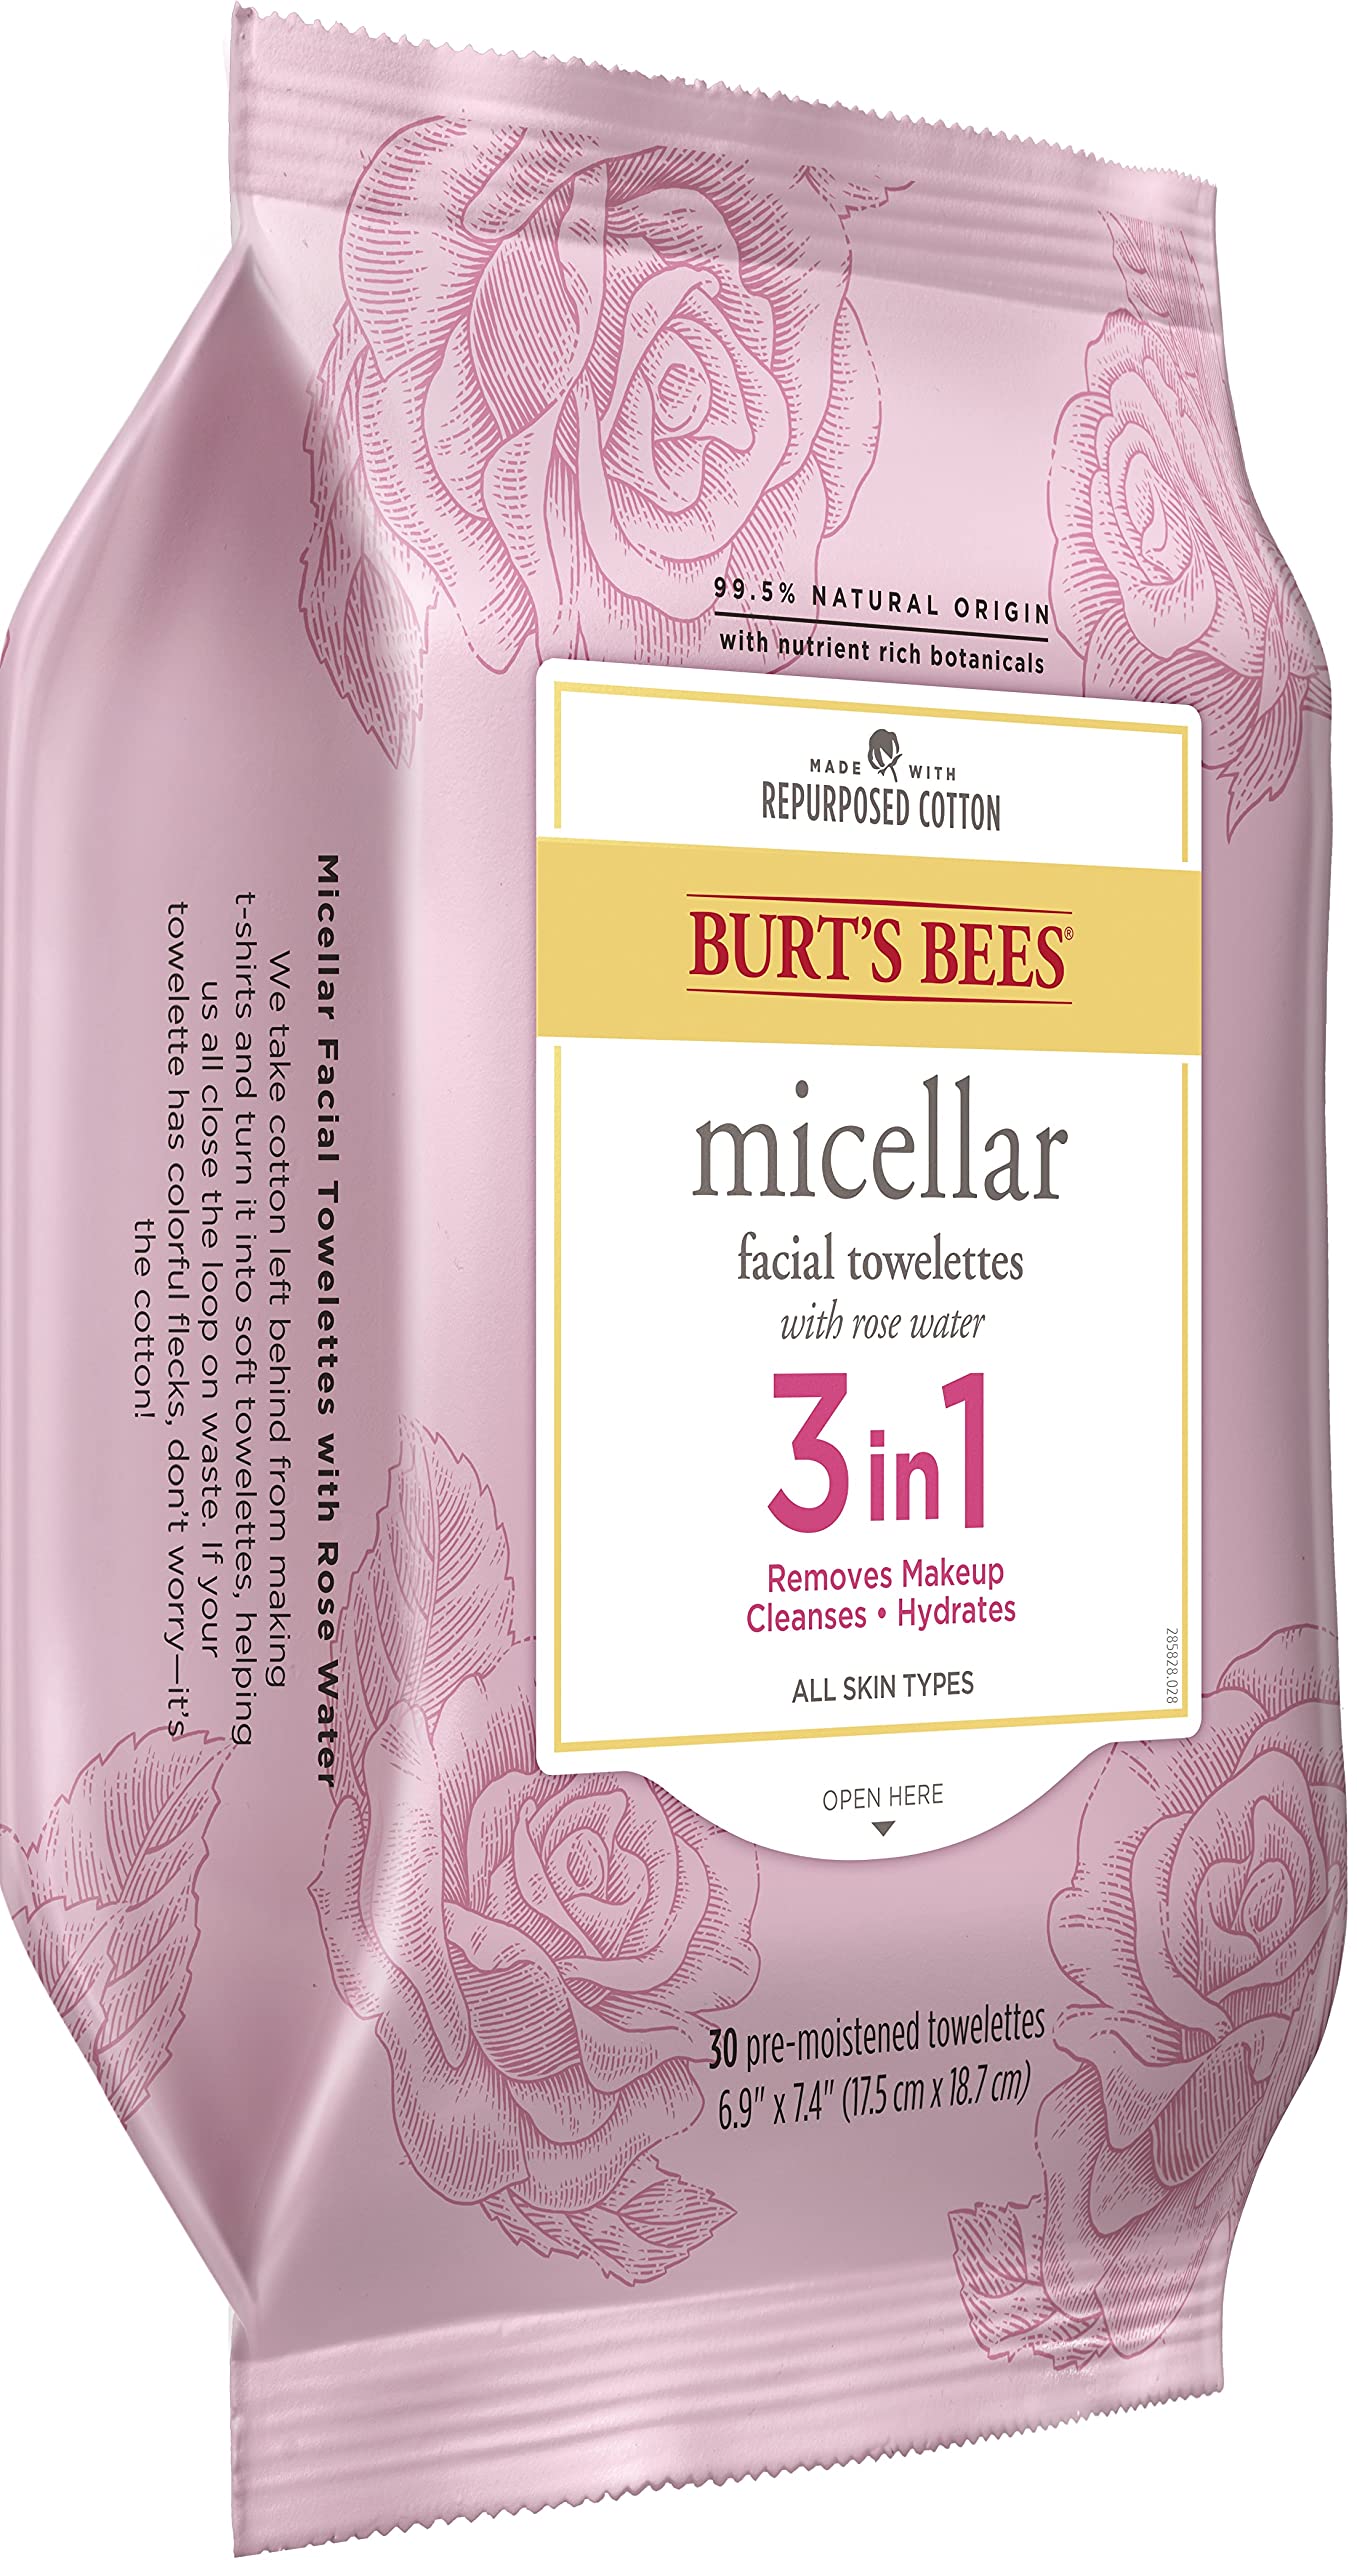 Burt's Bees Face Wipes, Makeup Remover Facial Cleansing Towelettes for All Skin Types, 3 in 1 Hydrating Micellar Cleanser with Rose Water, 30 Count (Pack Of 3)